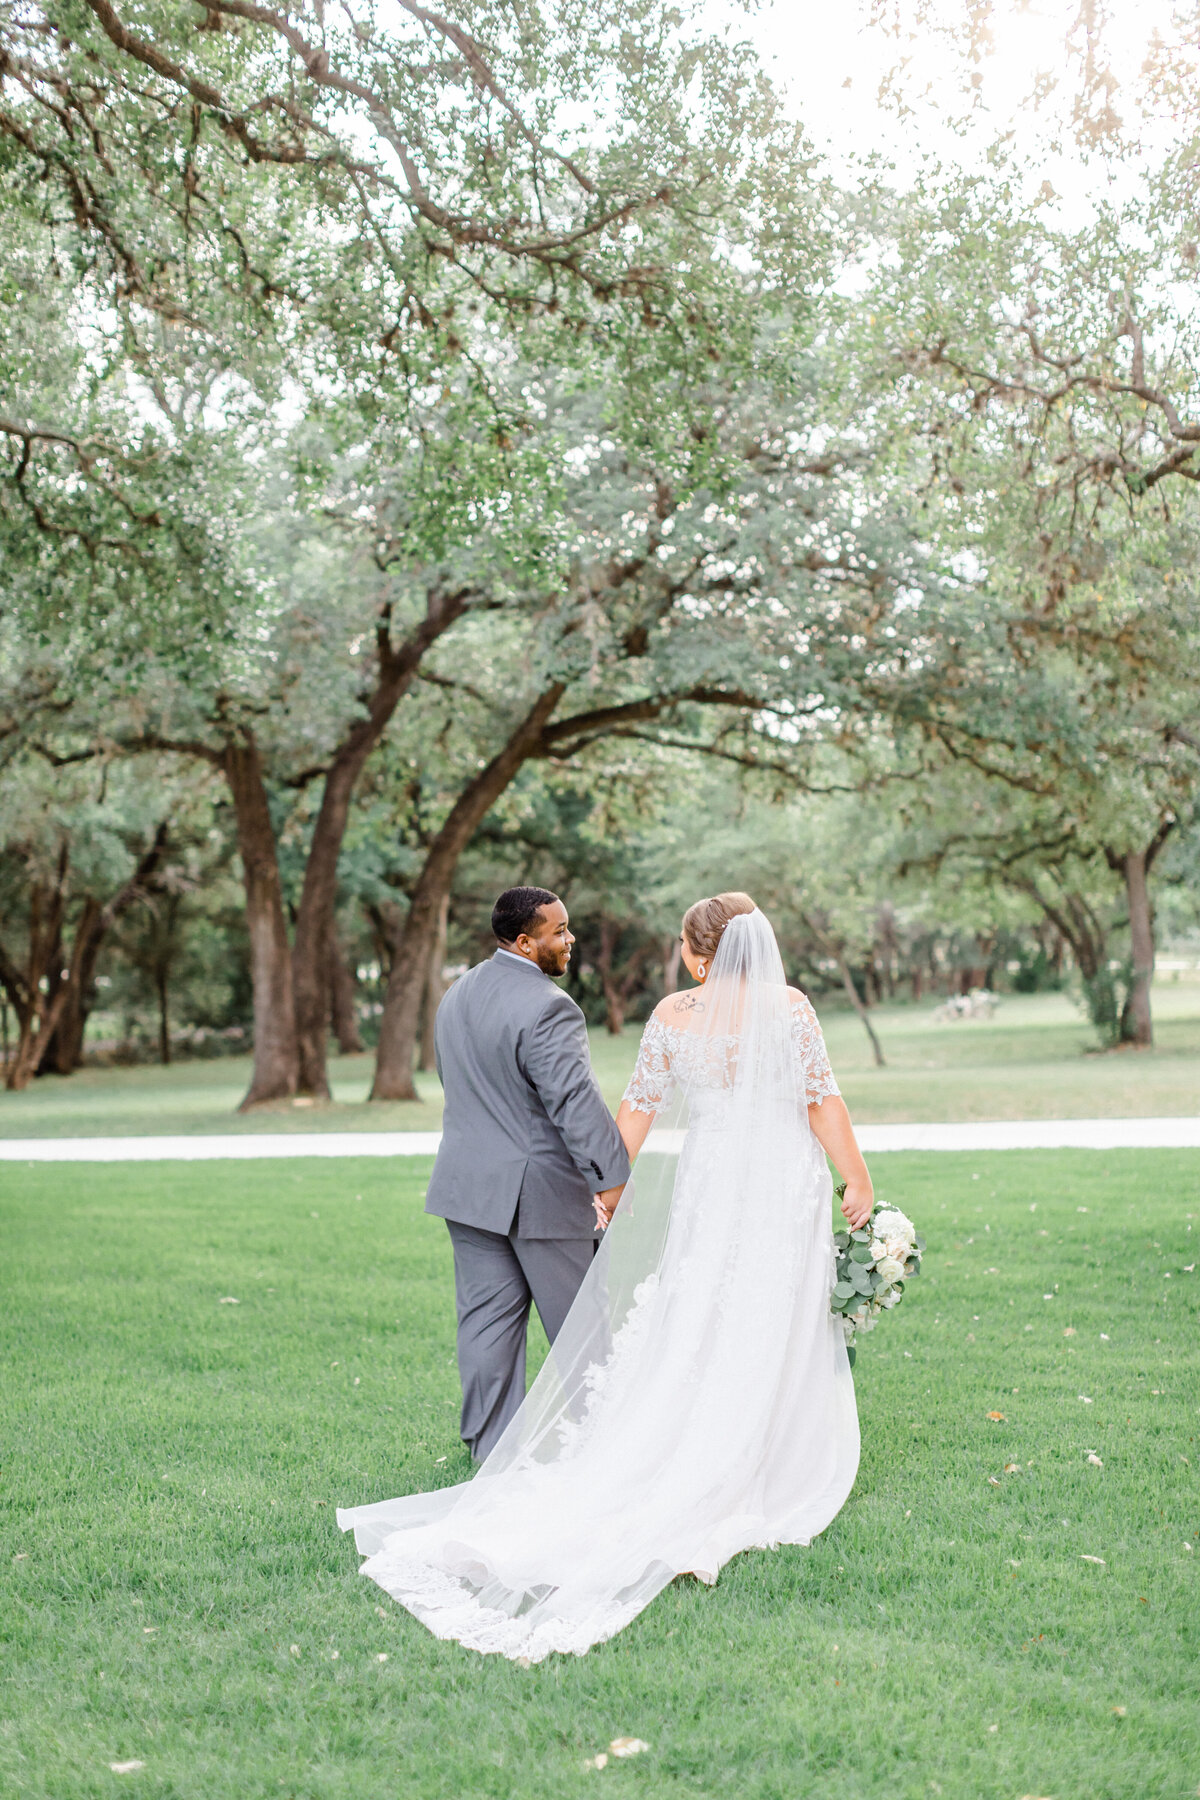 Jessica Chole Photography San Antonio Texas California Wedding Portrait Engagement Maternity Family Lifestyle Photographer Souther Cali TX CA Light Airy Bright Colorful Photography16